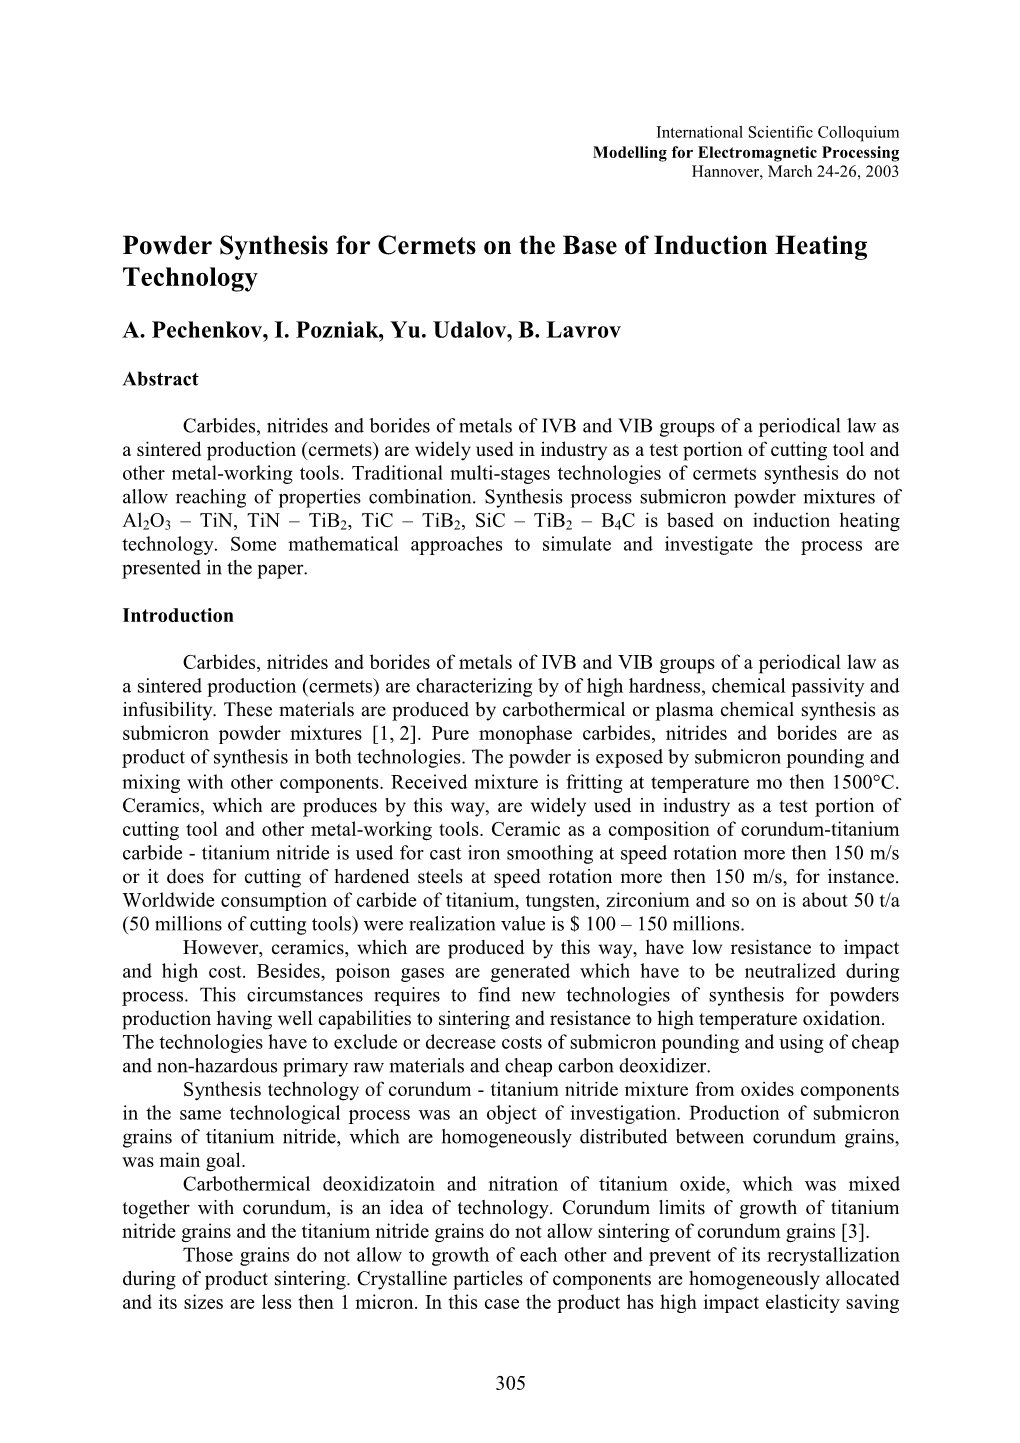 Powder Synthesis for Cermets on the Base of Induction Heating Technology